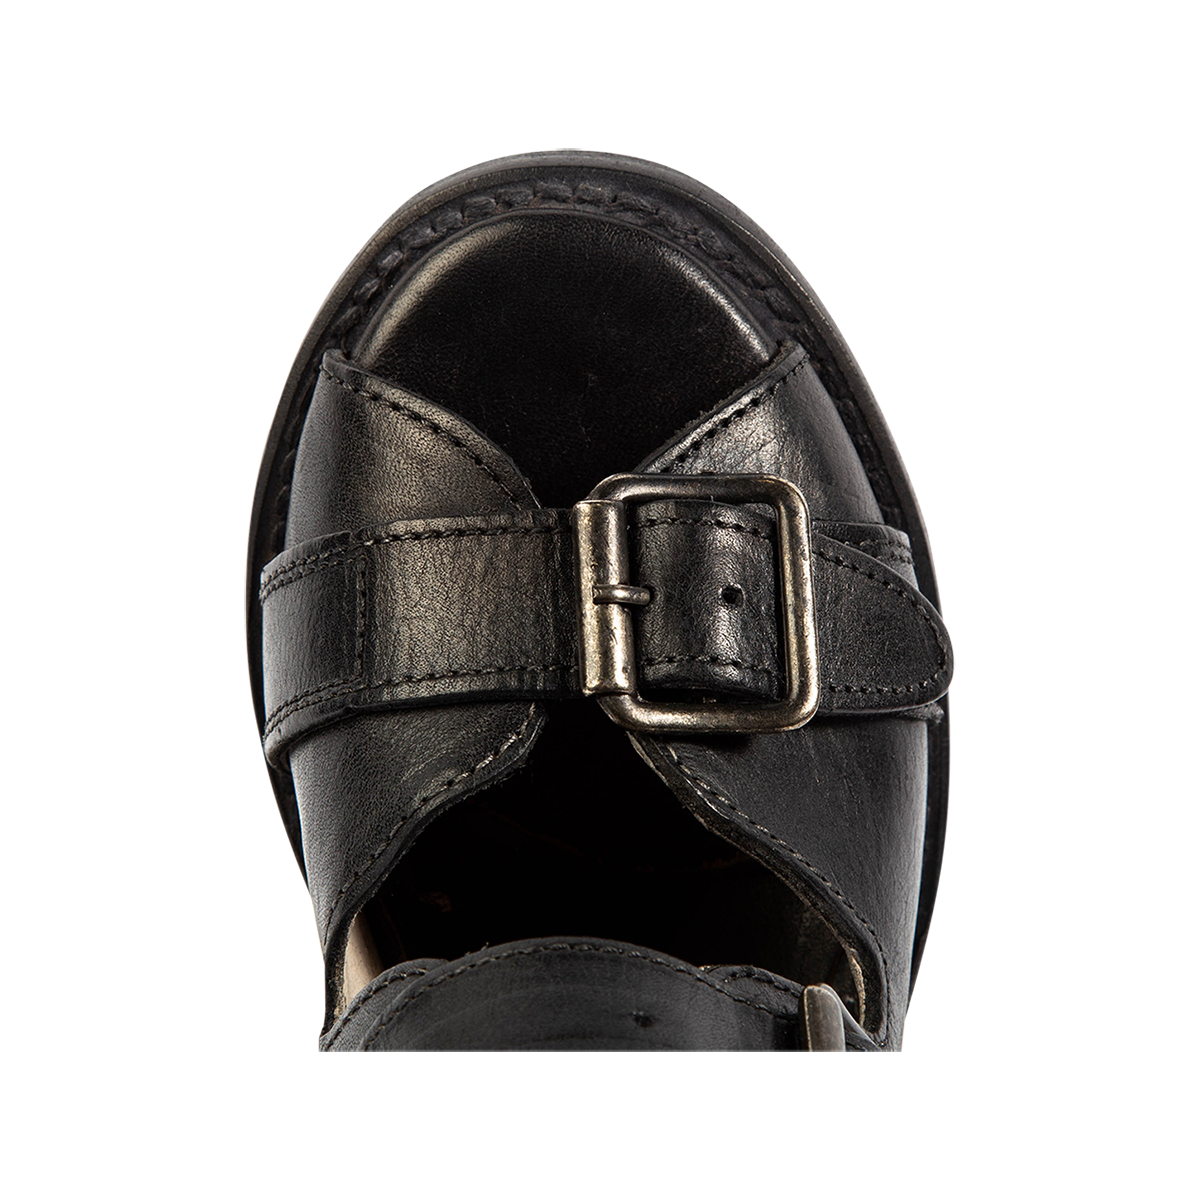 Top view showing round toe with leather toe and ankle straps on FREEBIRD women's Bond black/black sandal 